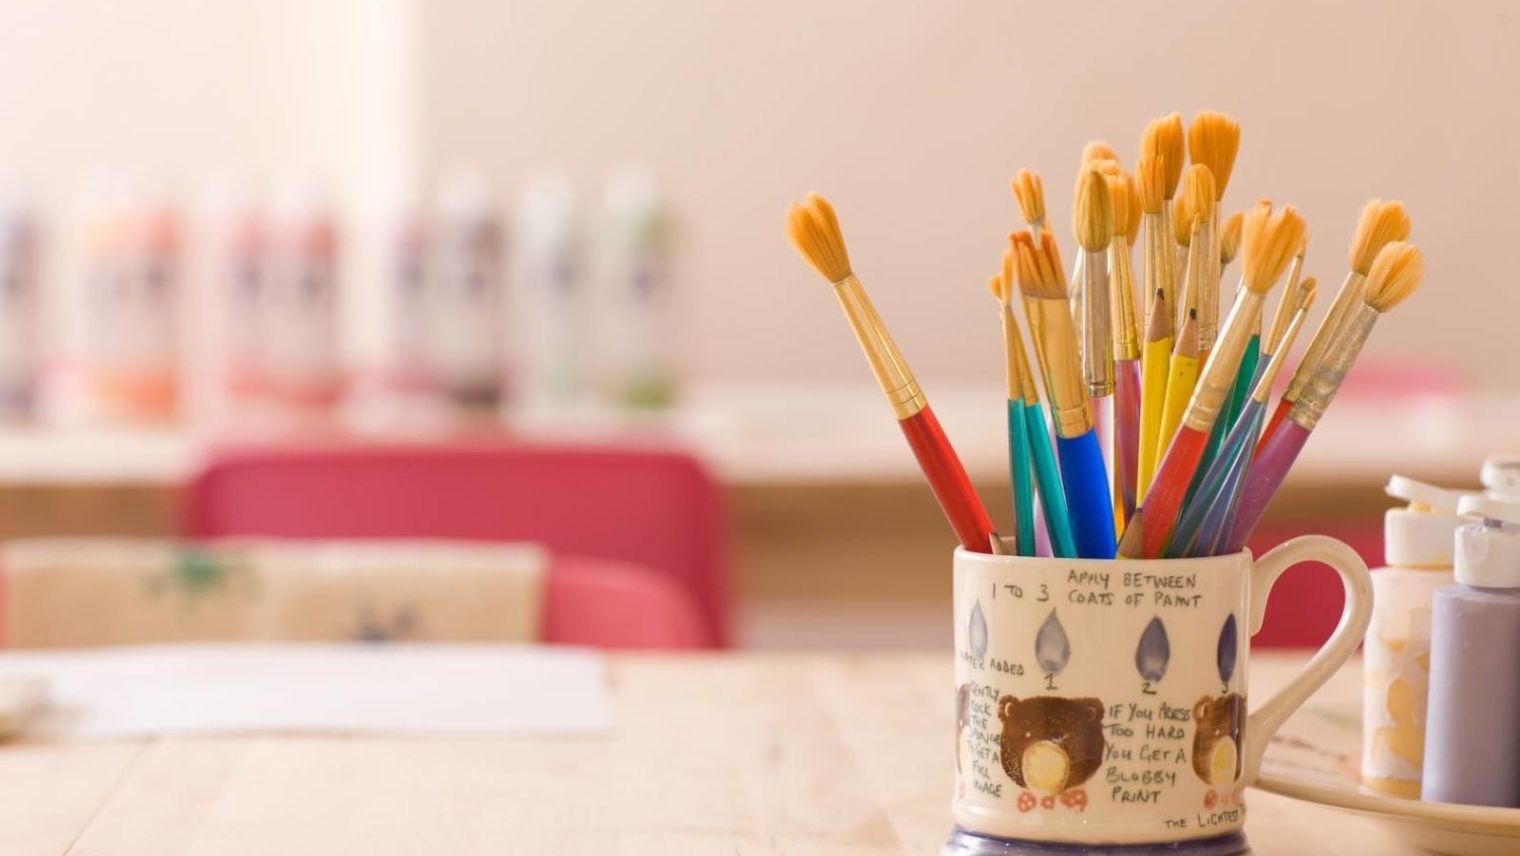 A hand-painted cup holding paintbrushes at Pottery Café, Clapham